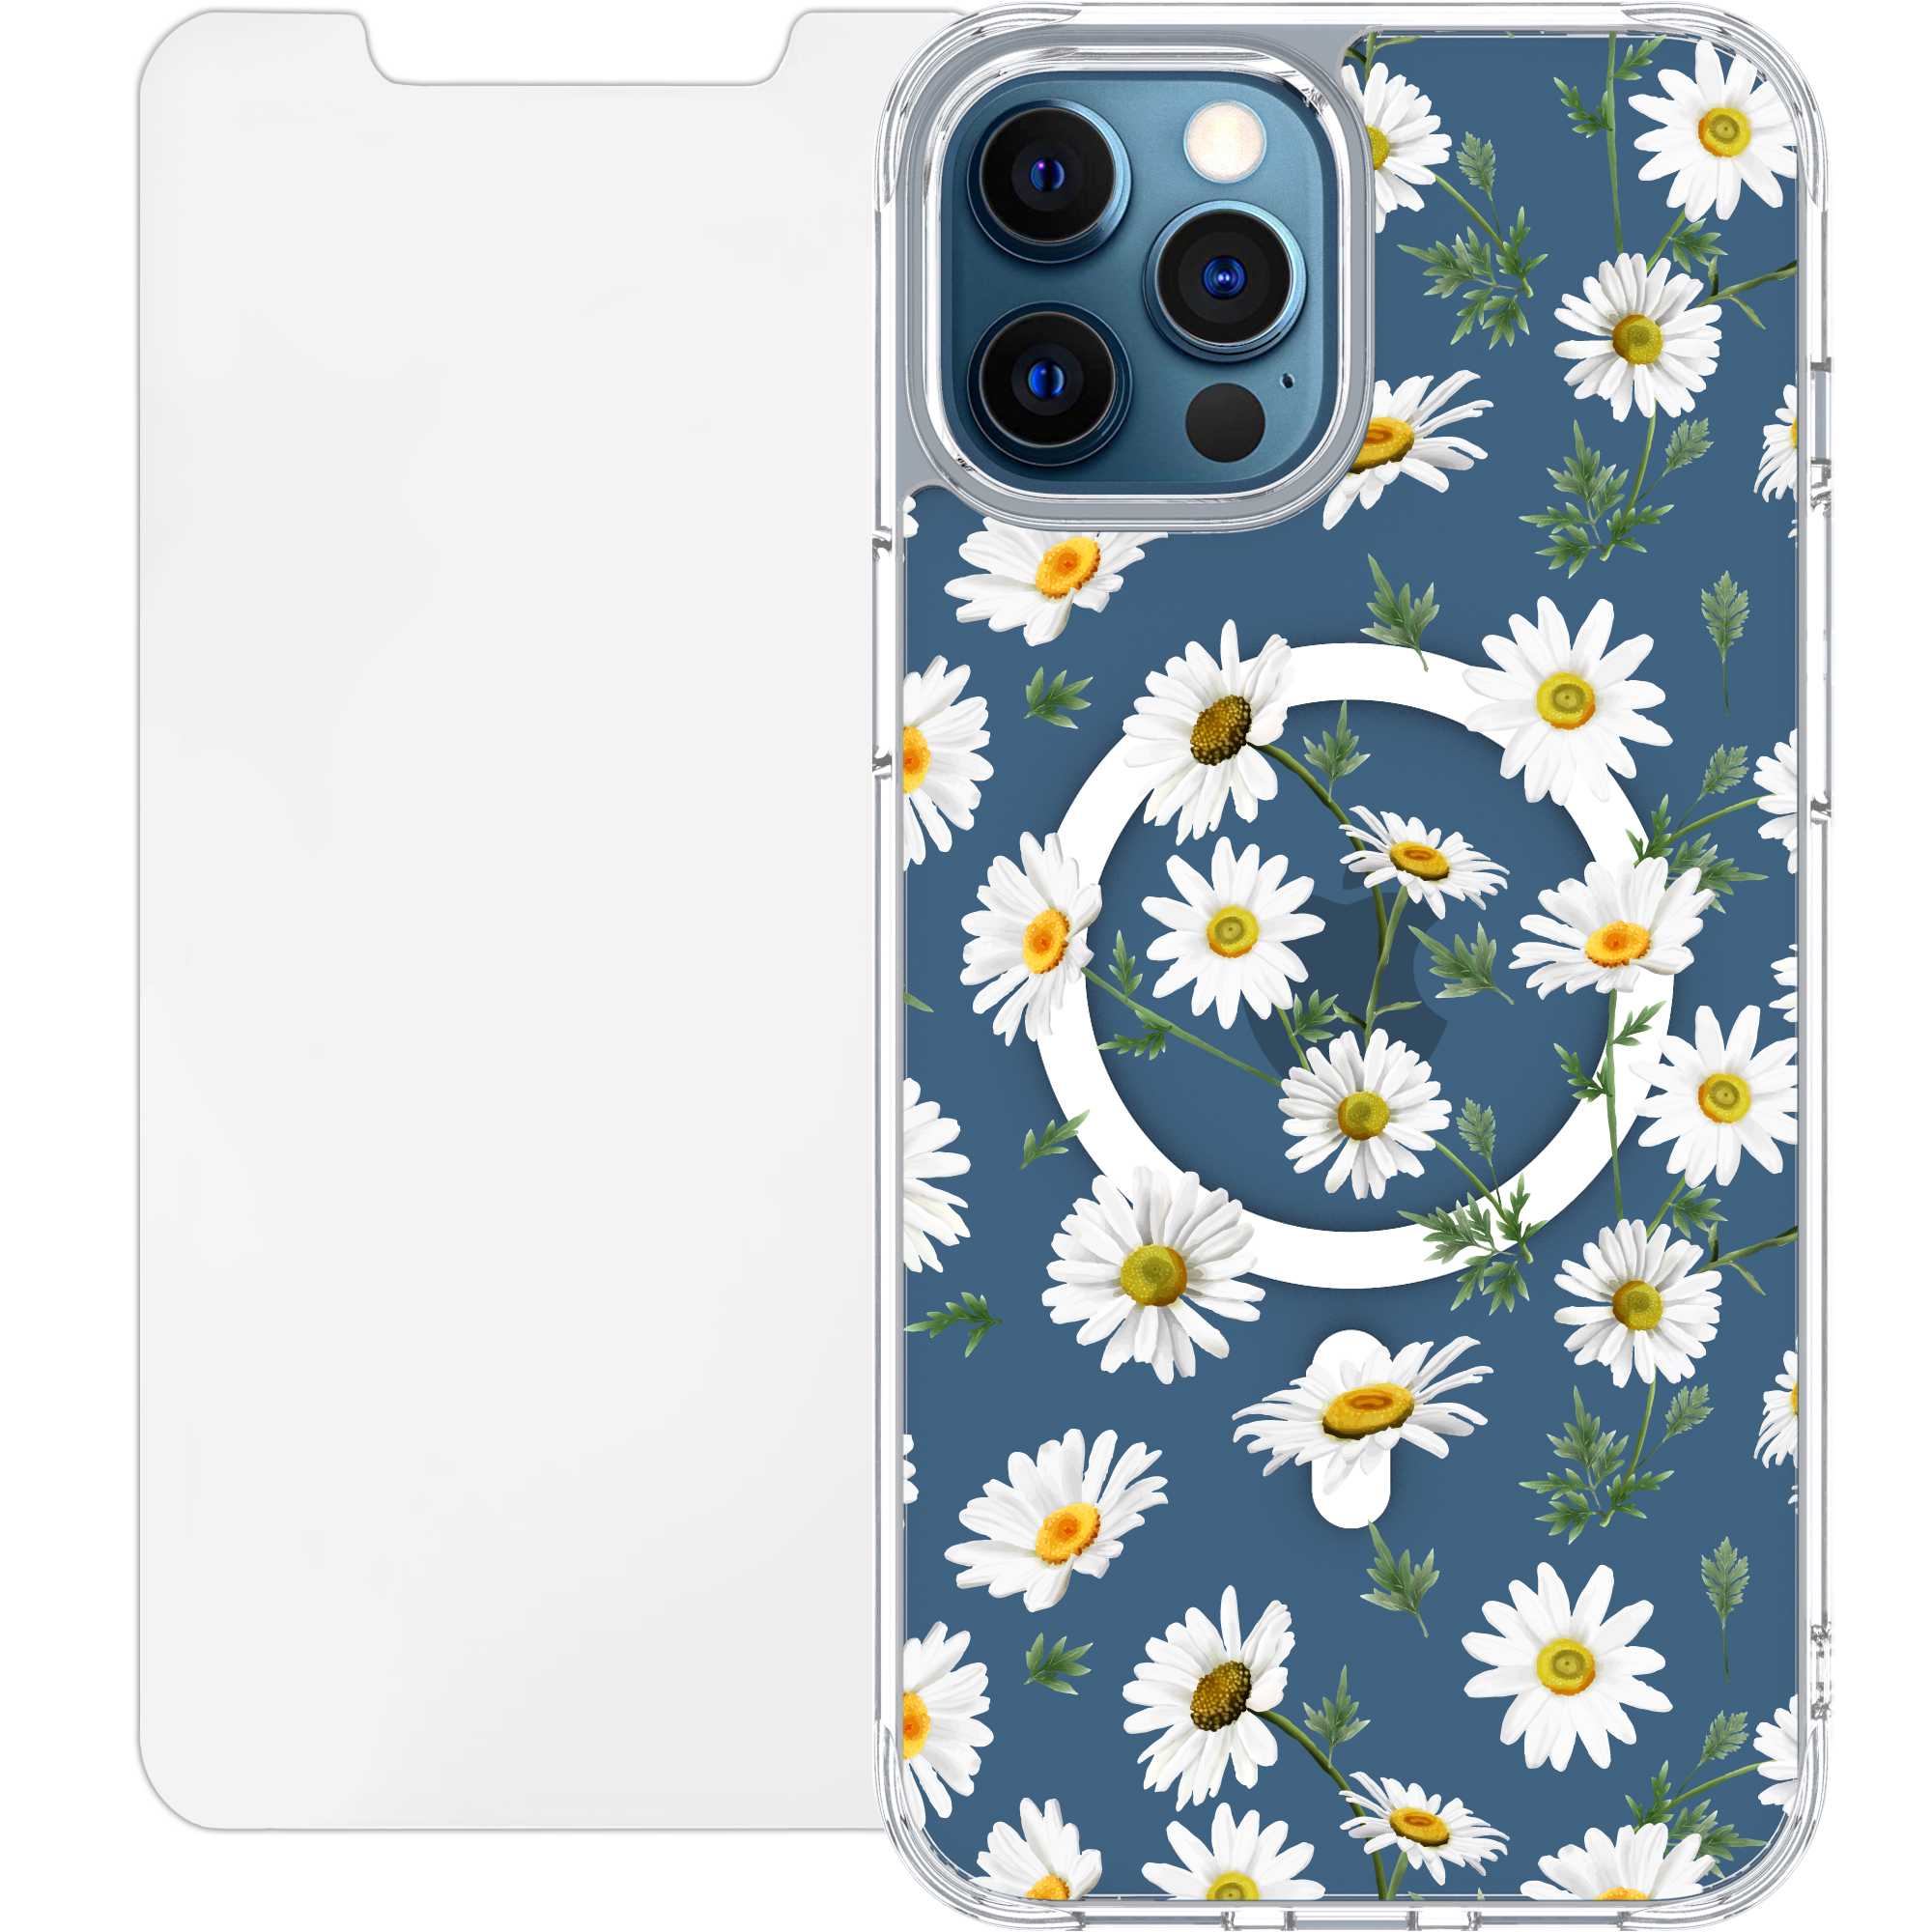 Scooch MagCase for iPhone 12 Pro Max Daisies Scooch MagCase